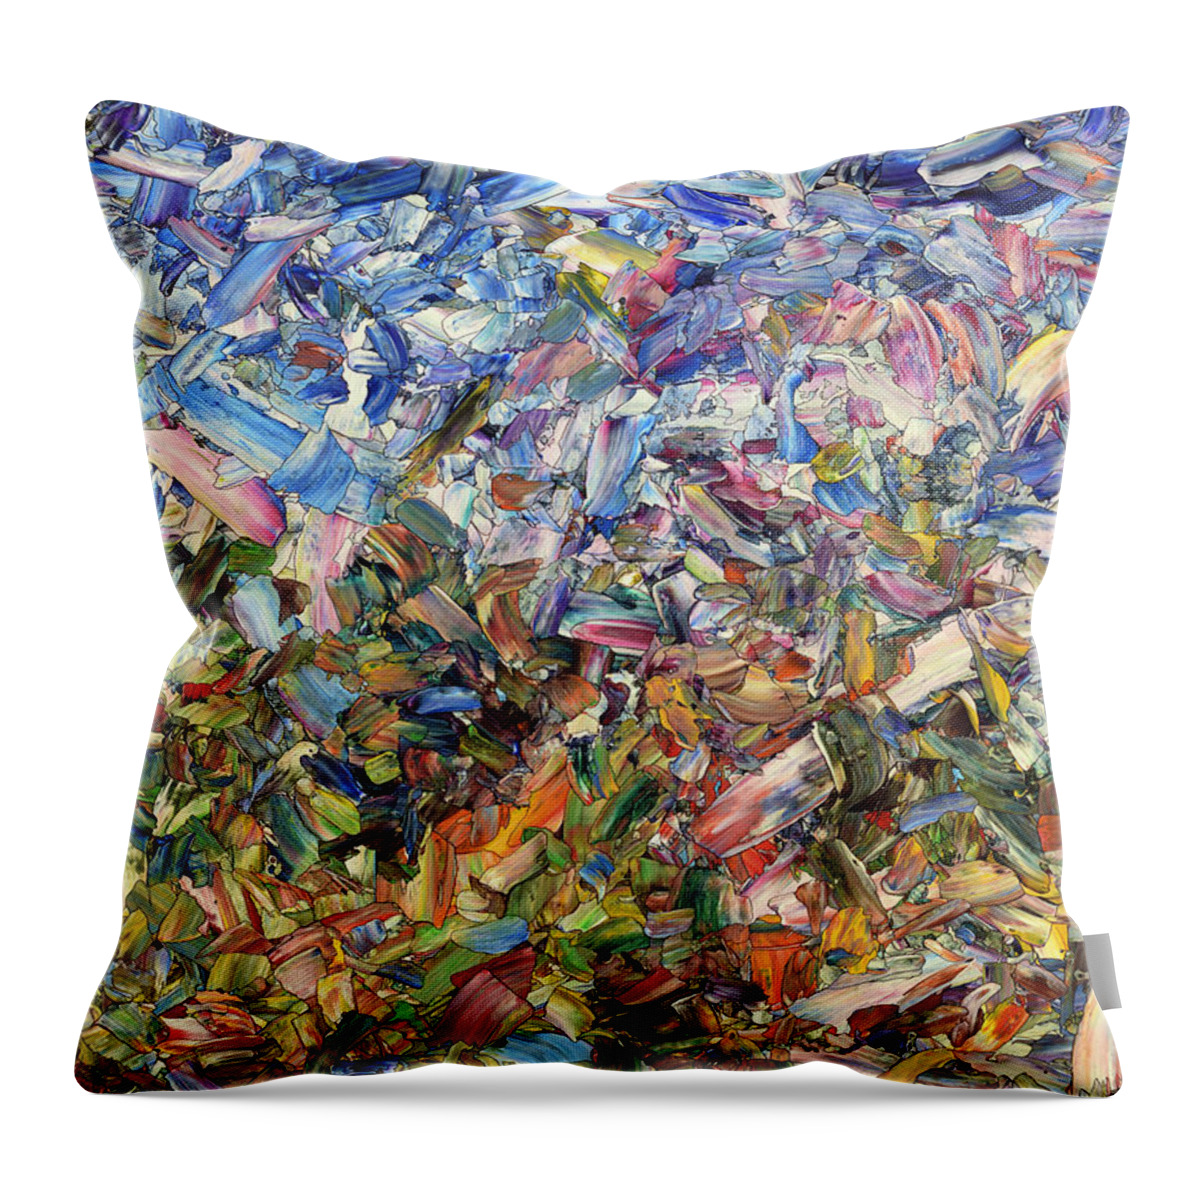 Garden Throw Pillow featuring the painting Fragmented Garden by James W Johnson